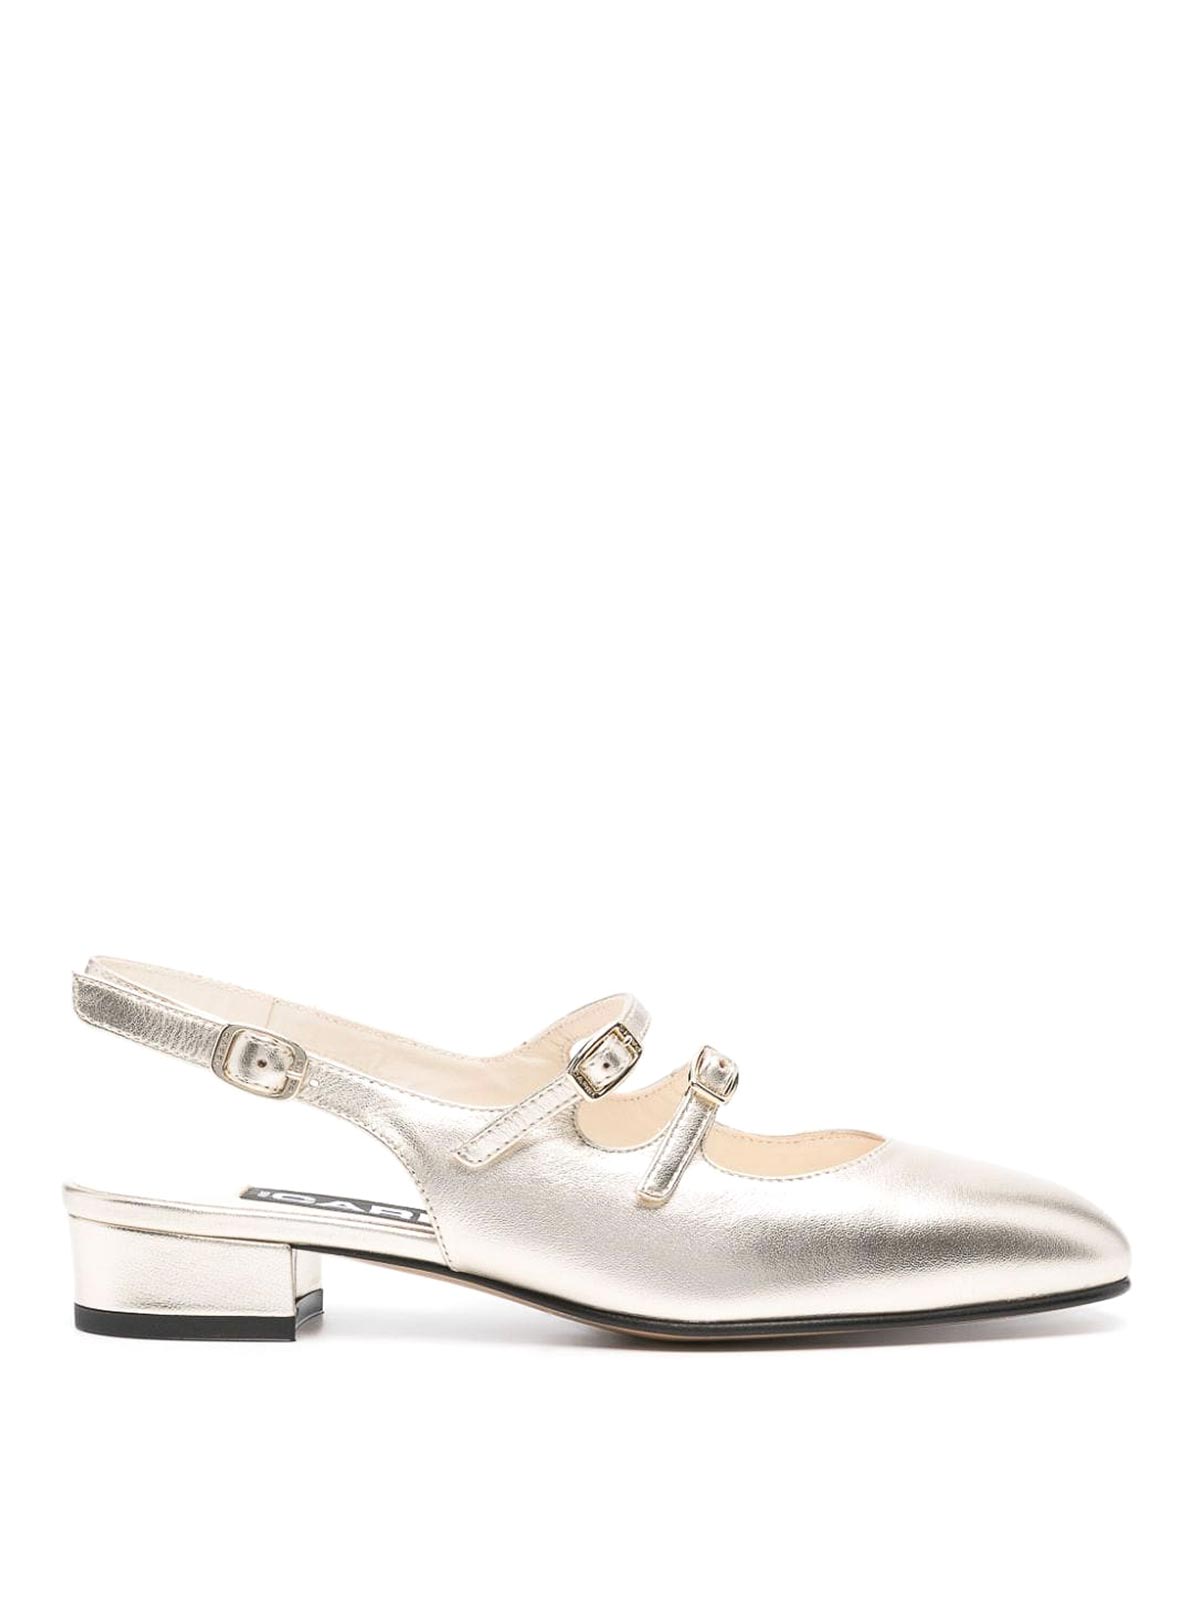 Care Label Slingback Peche Night In Leather In Gray